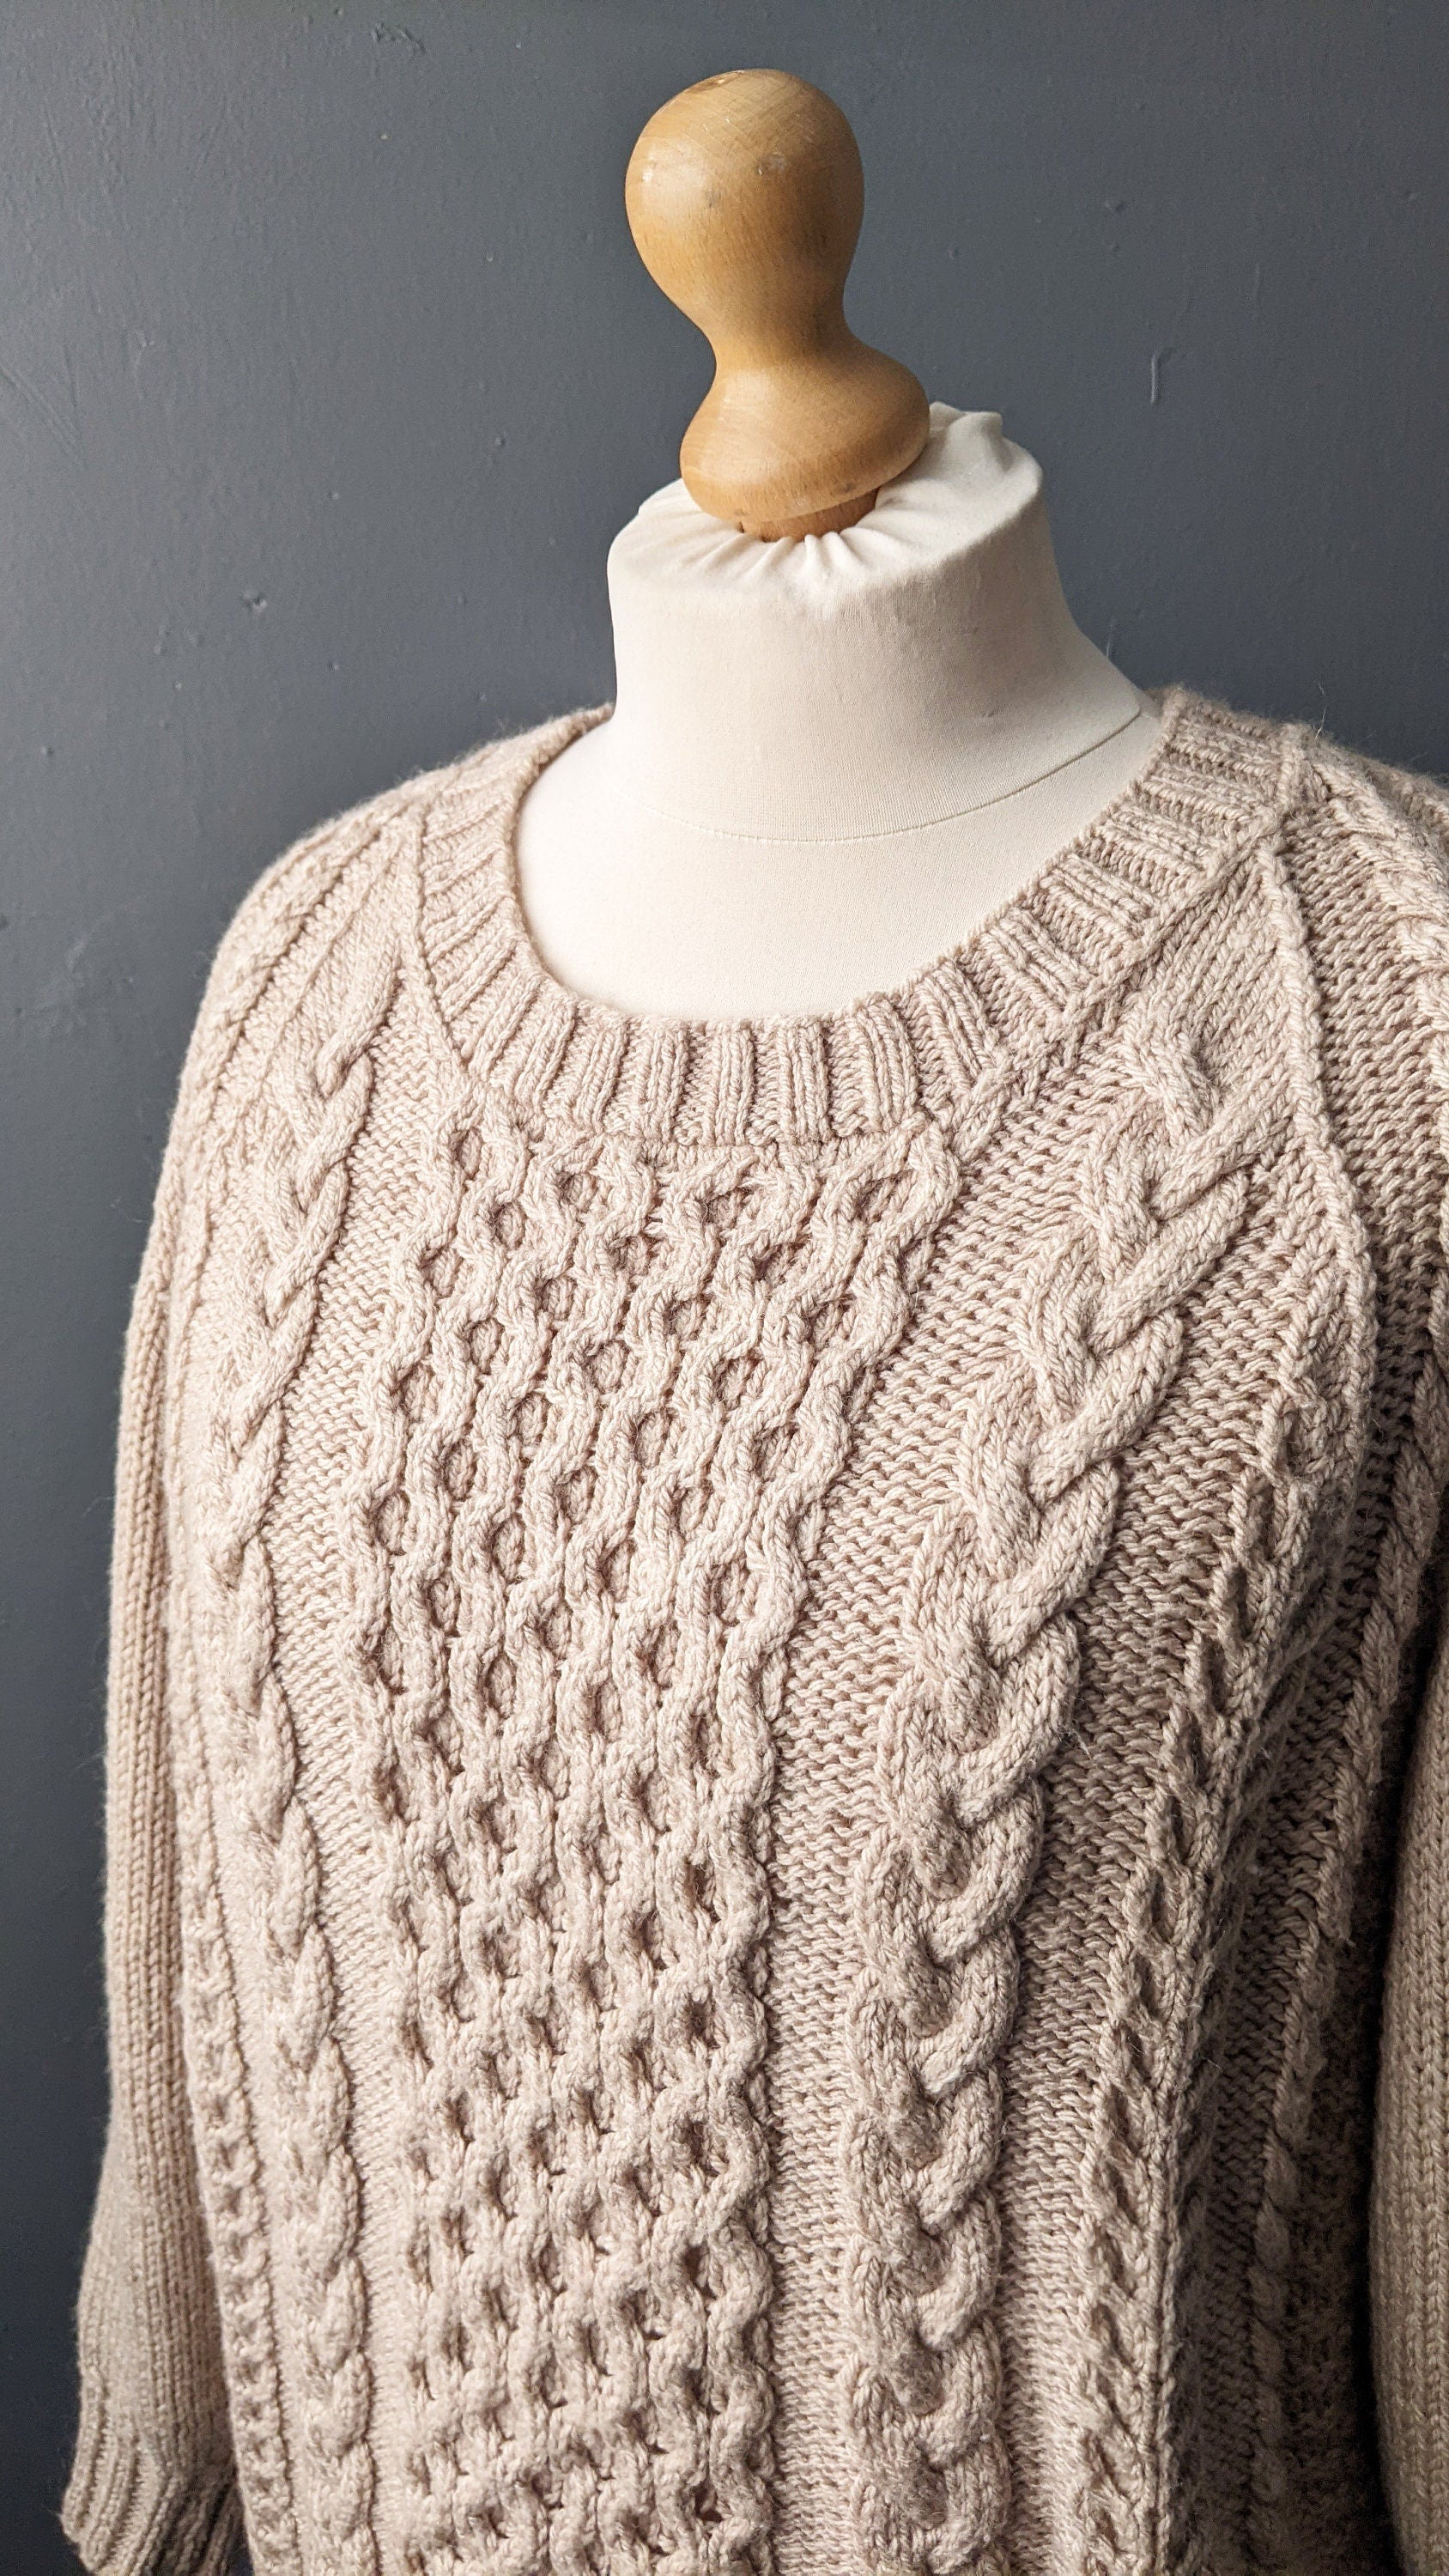 Vintage Aran Wool Jumper, Unisex Cable Knit Pullover, Plus Size 46 Chest